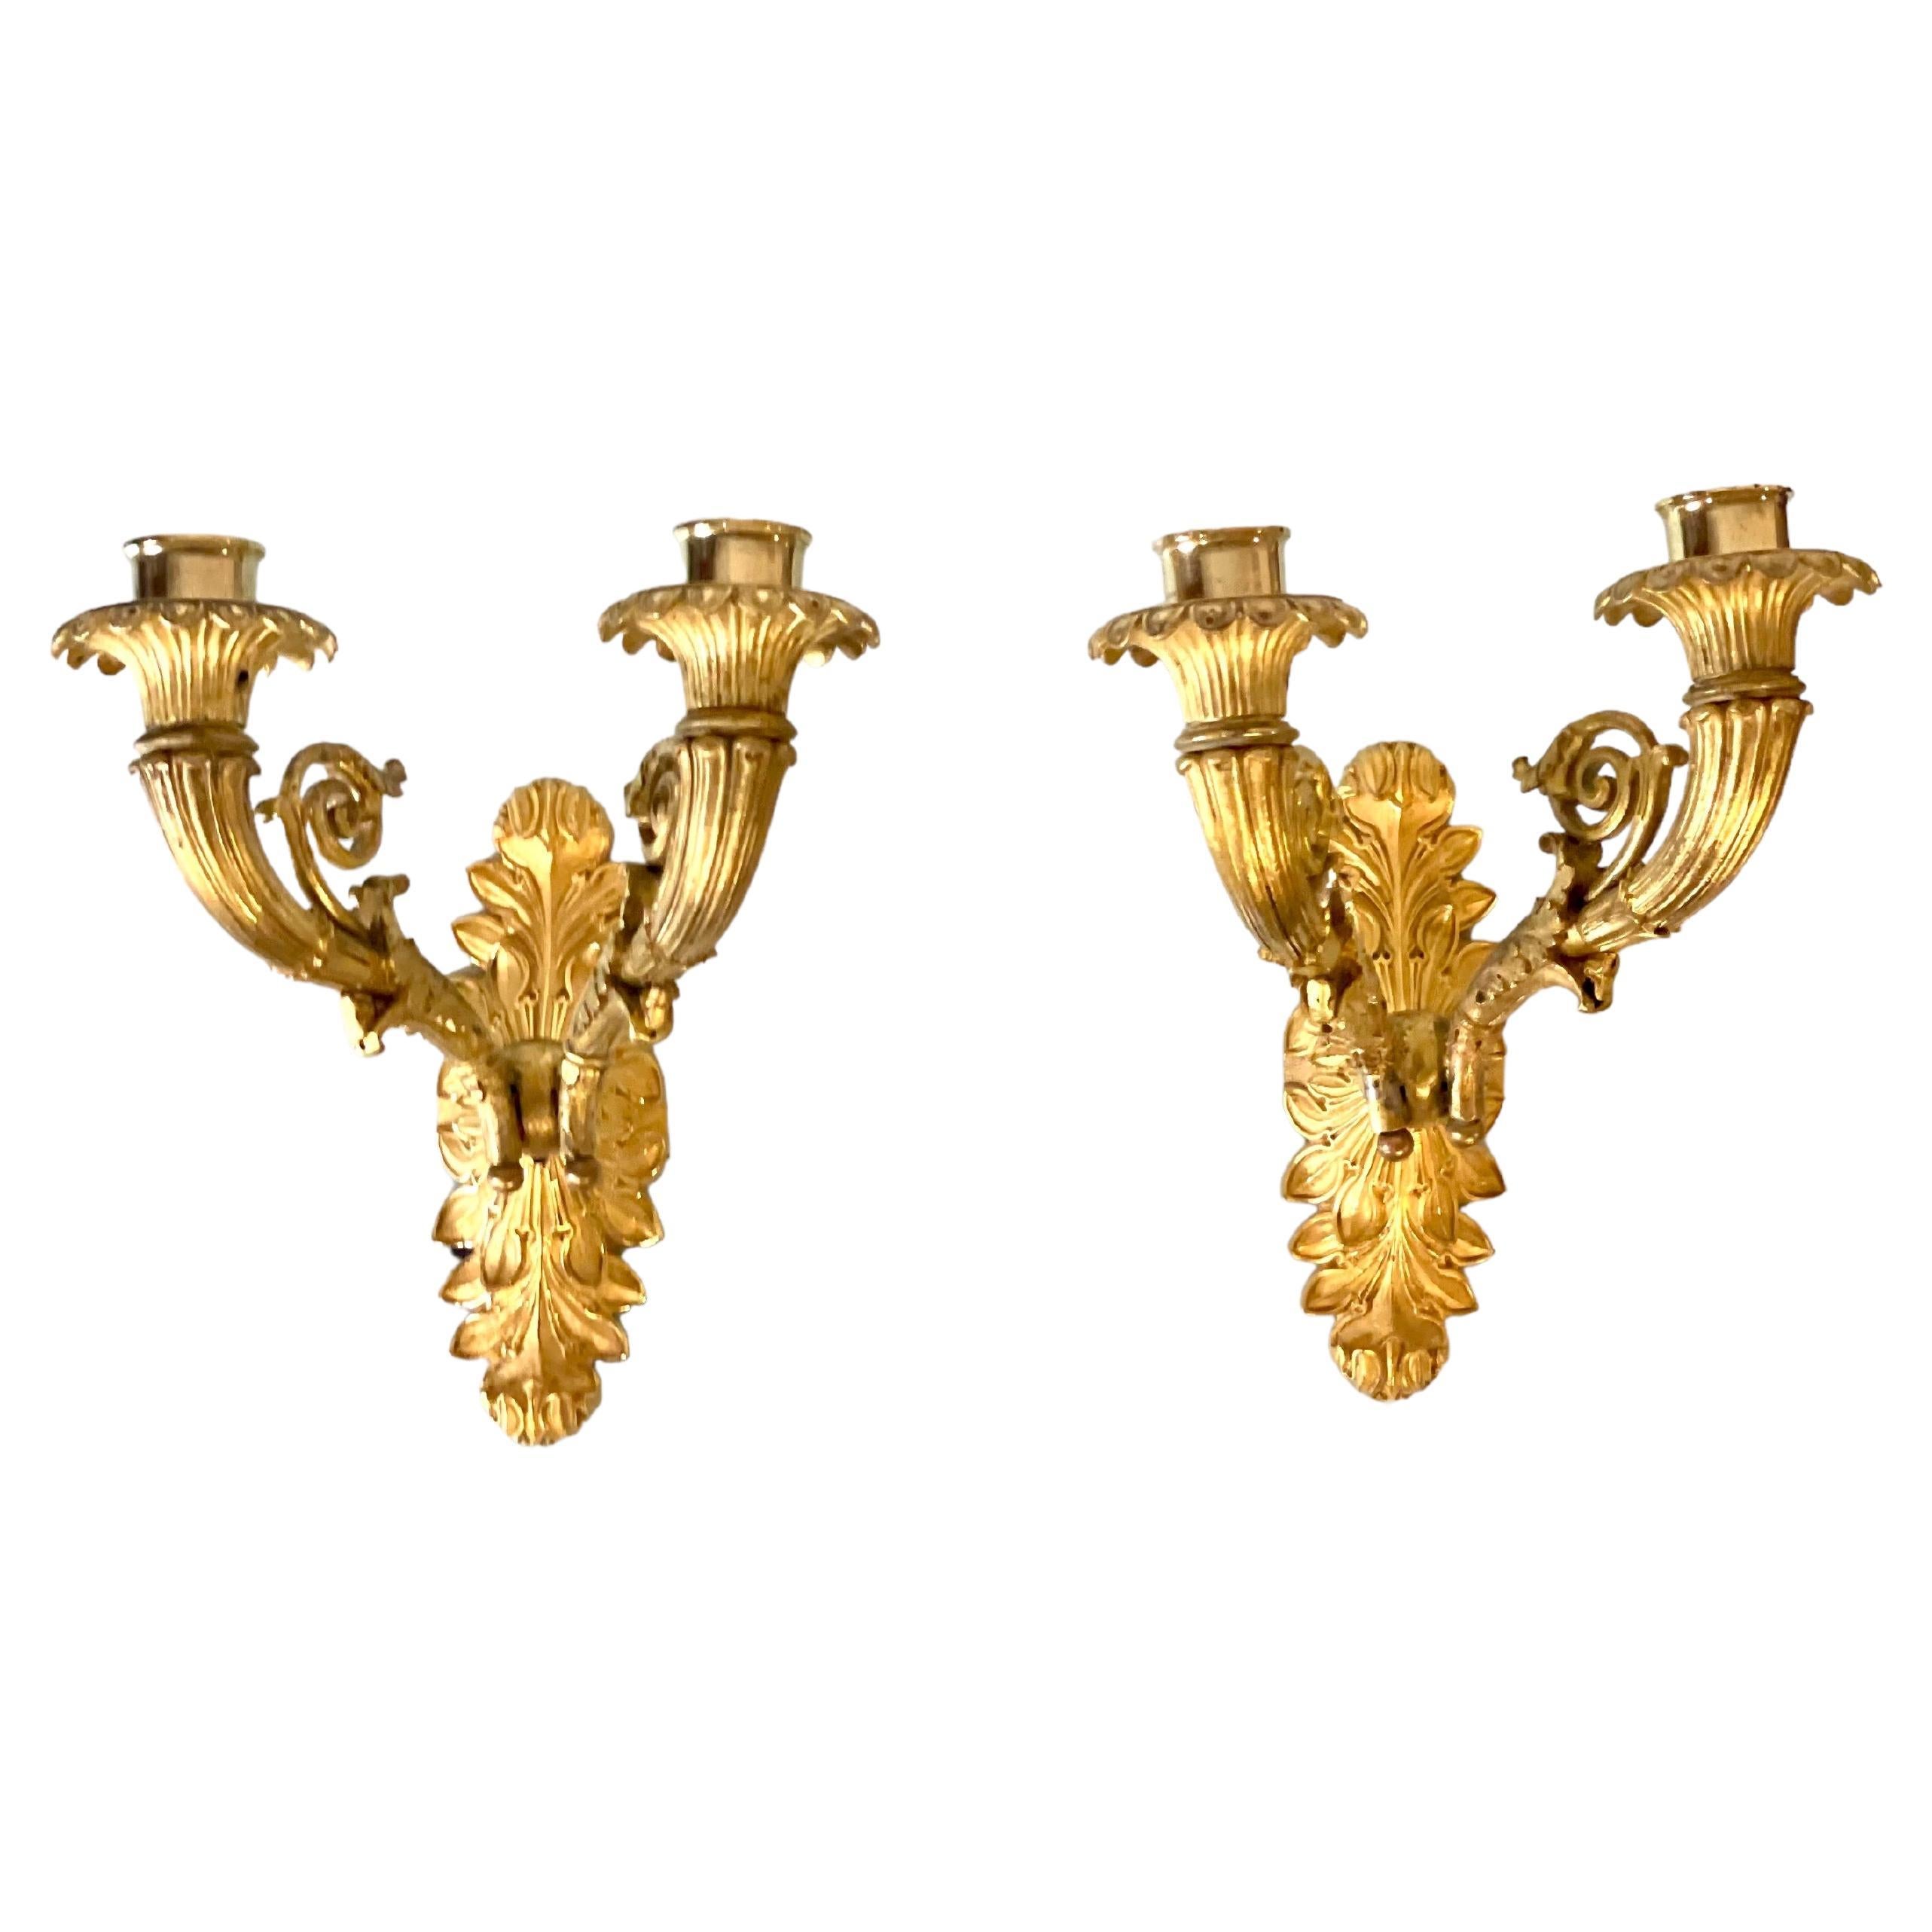 Pair of French Restauration Period Gilded Bronze Wall Sconces